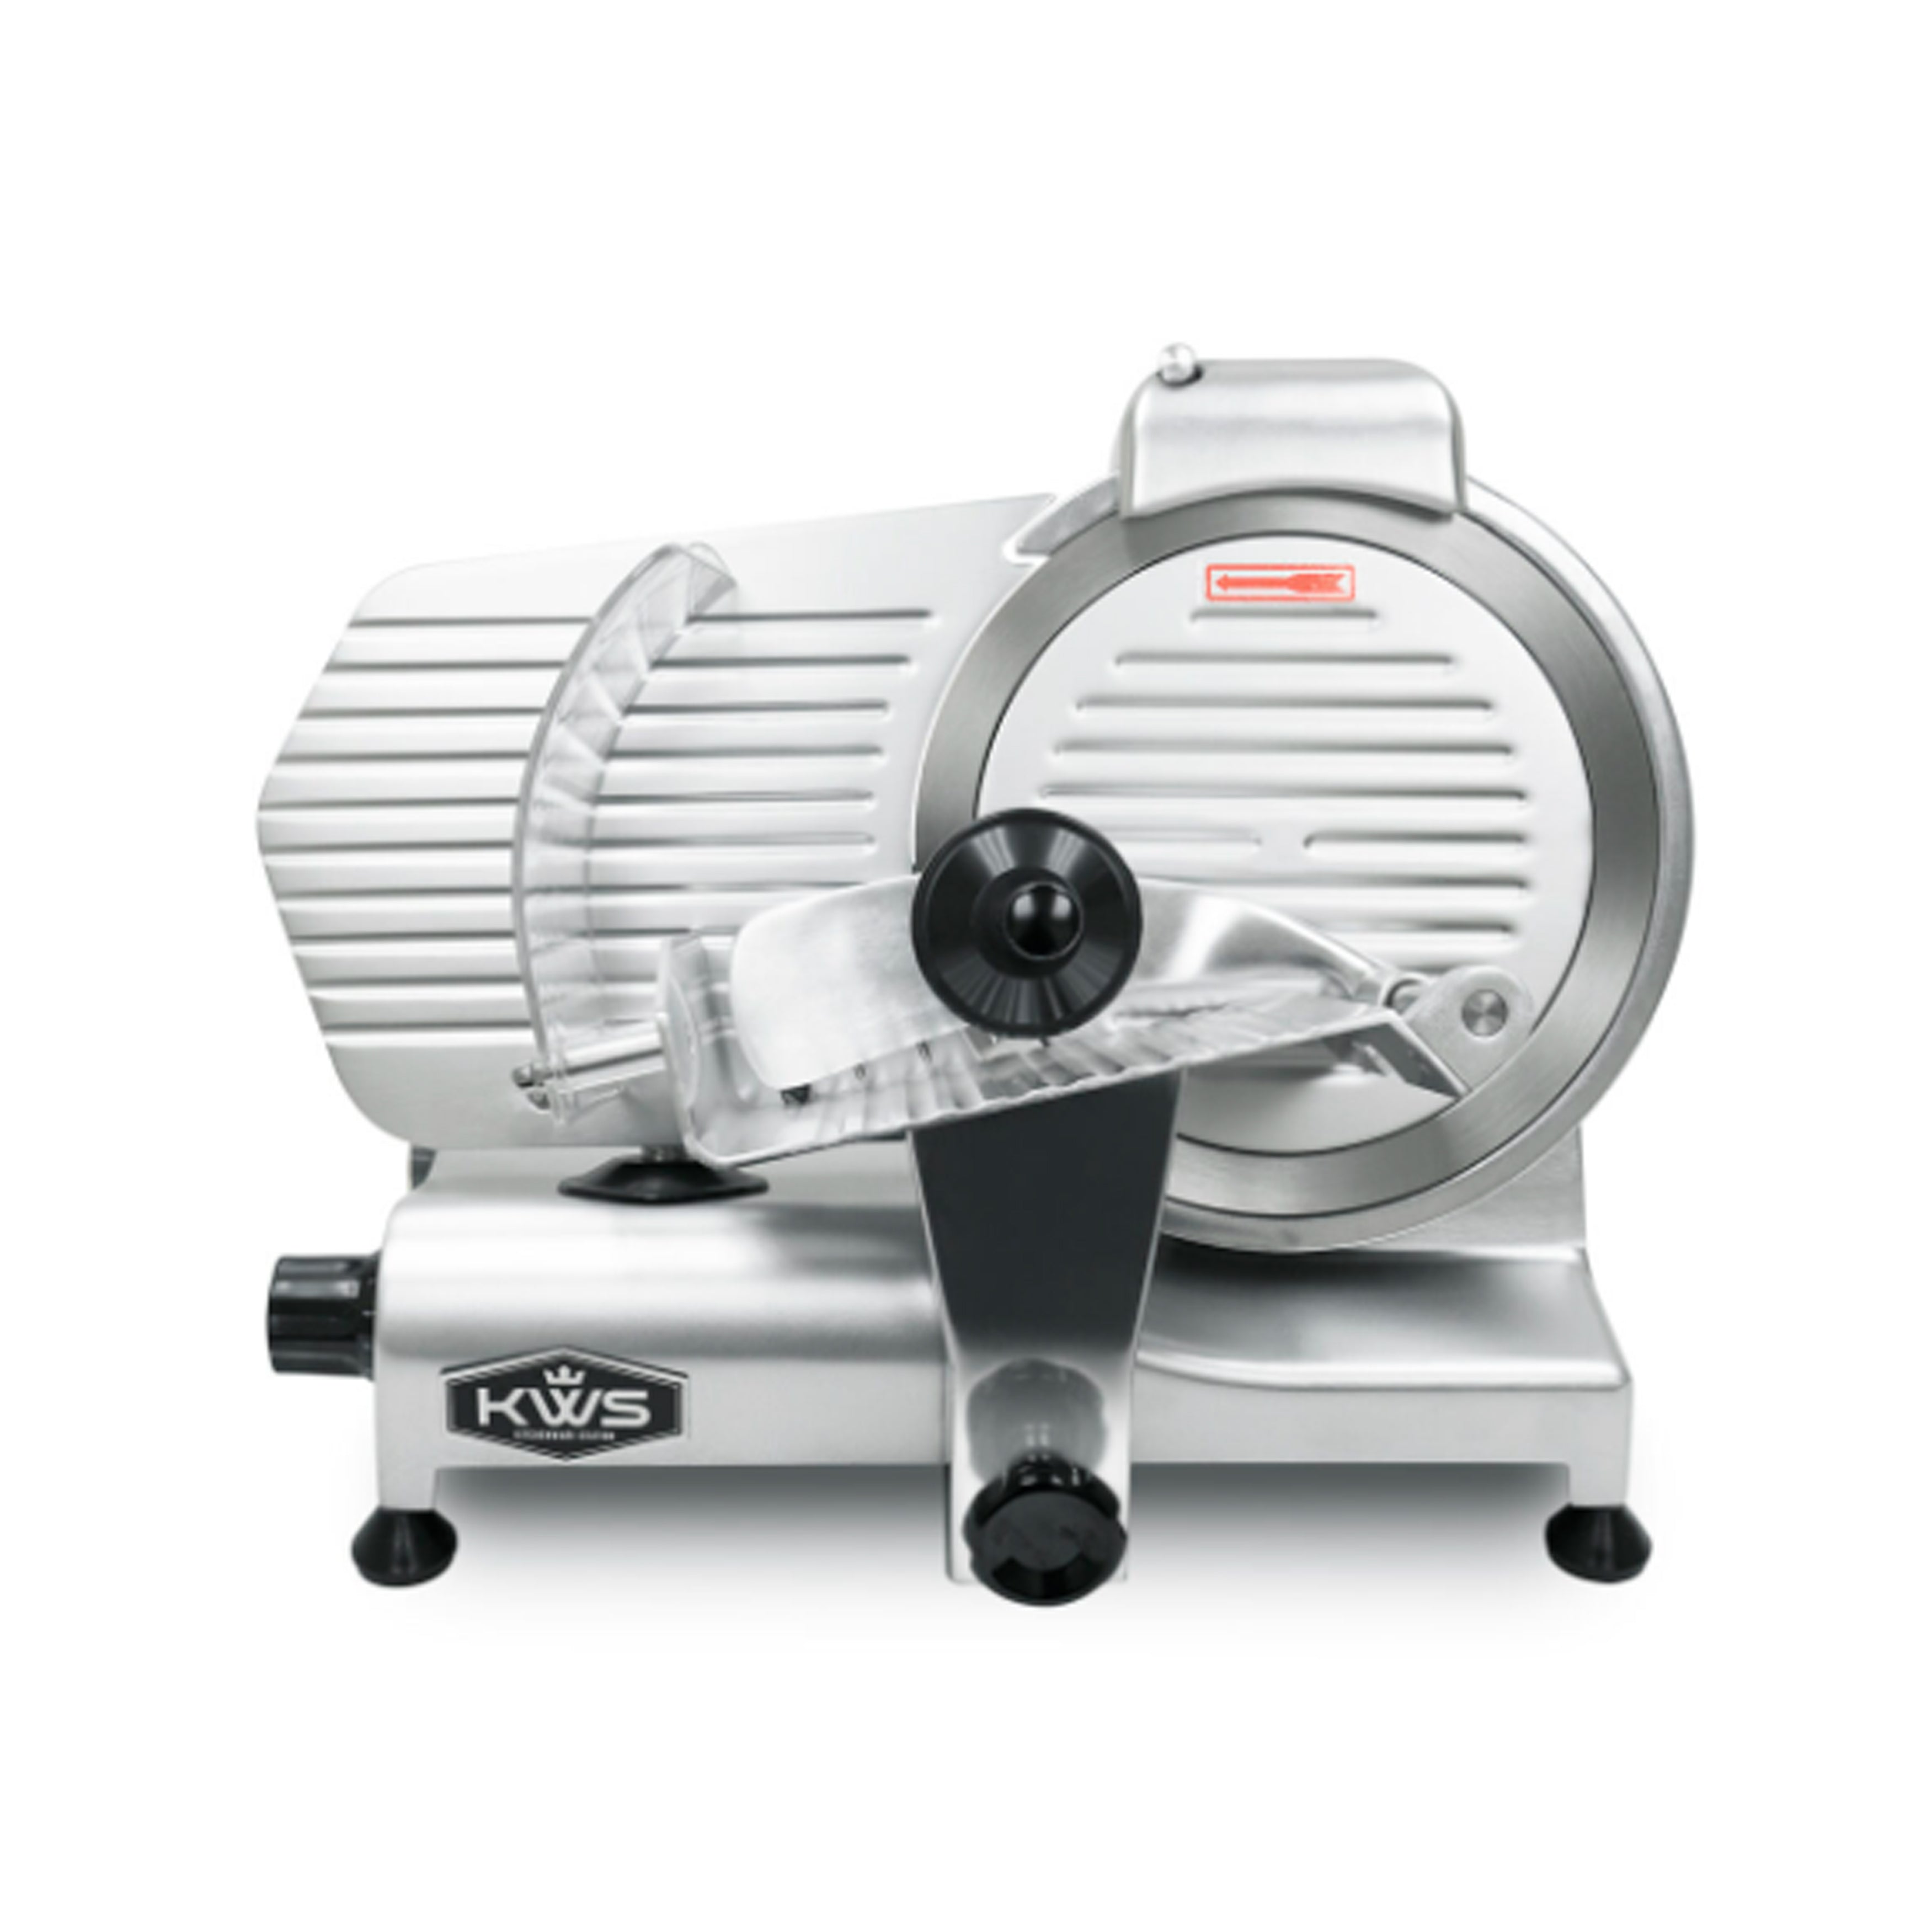 KWS - MS-10NS, Commercial 10″ Meat Slicer with Stainless Steel Blade